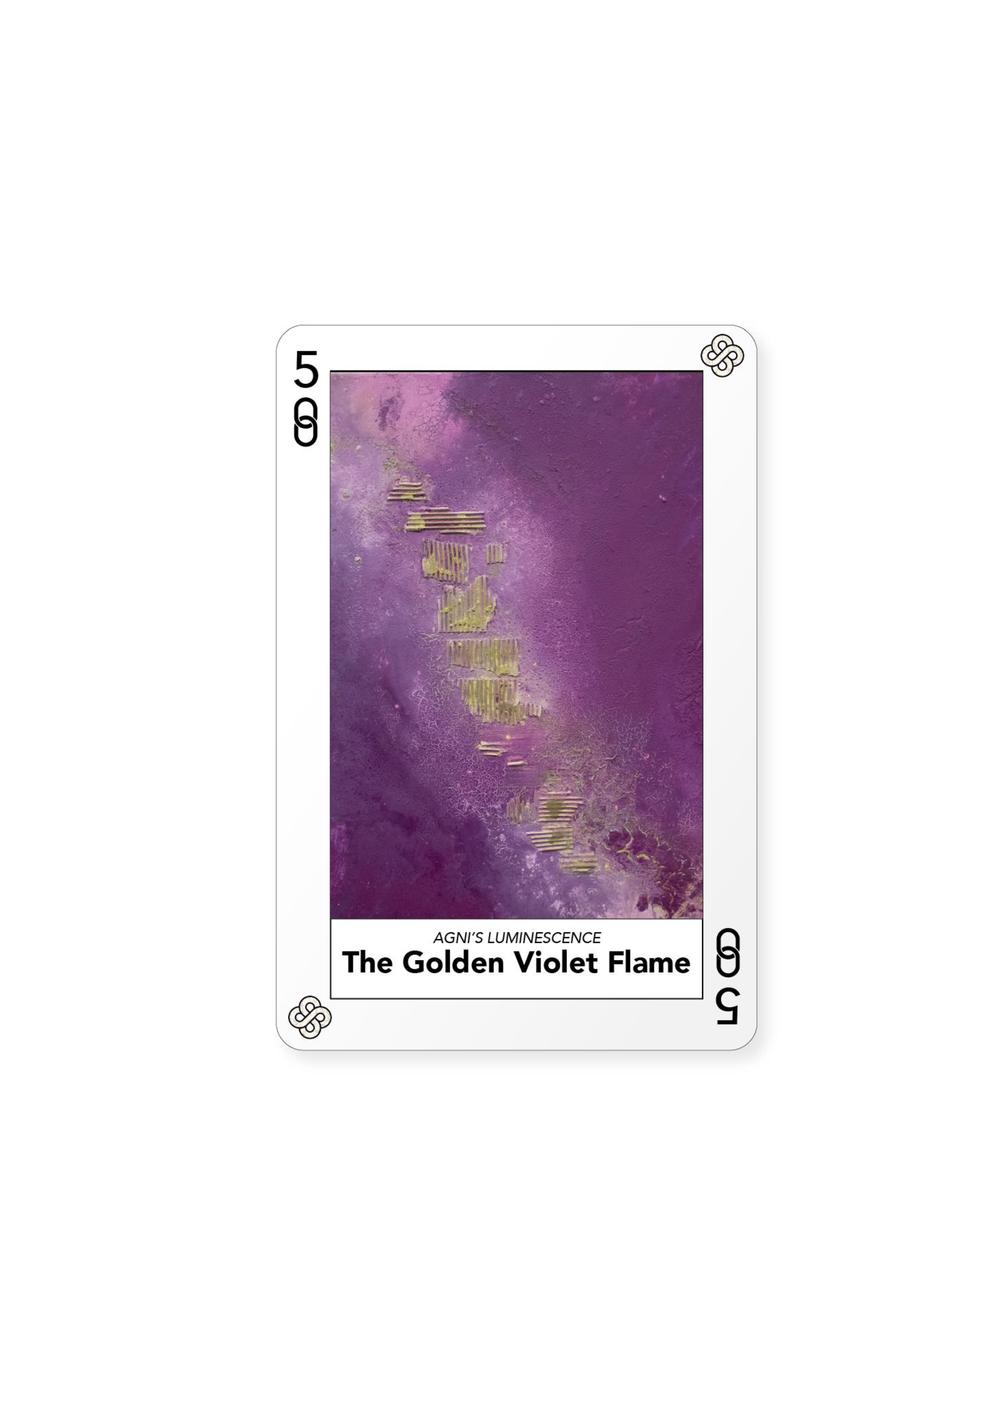 Certificate of Authenticity and Consignment - The Golden Violet Flame